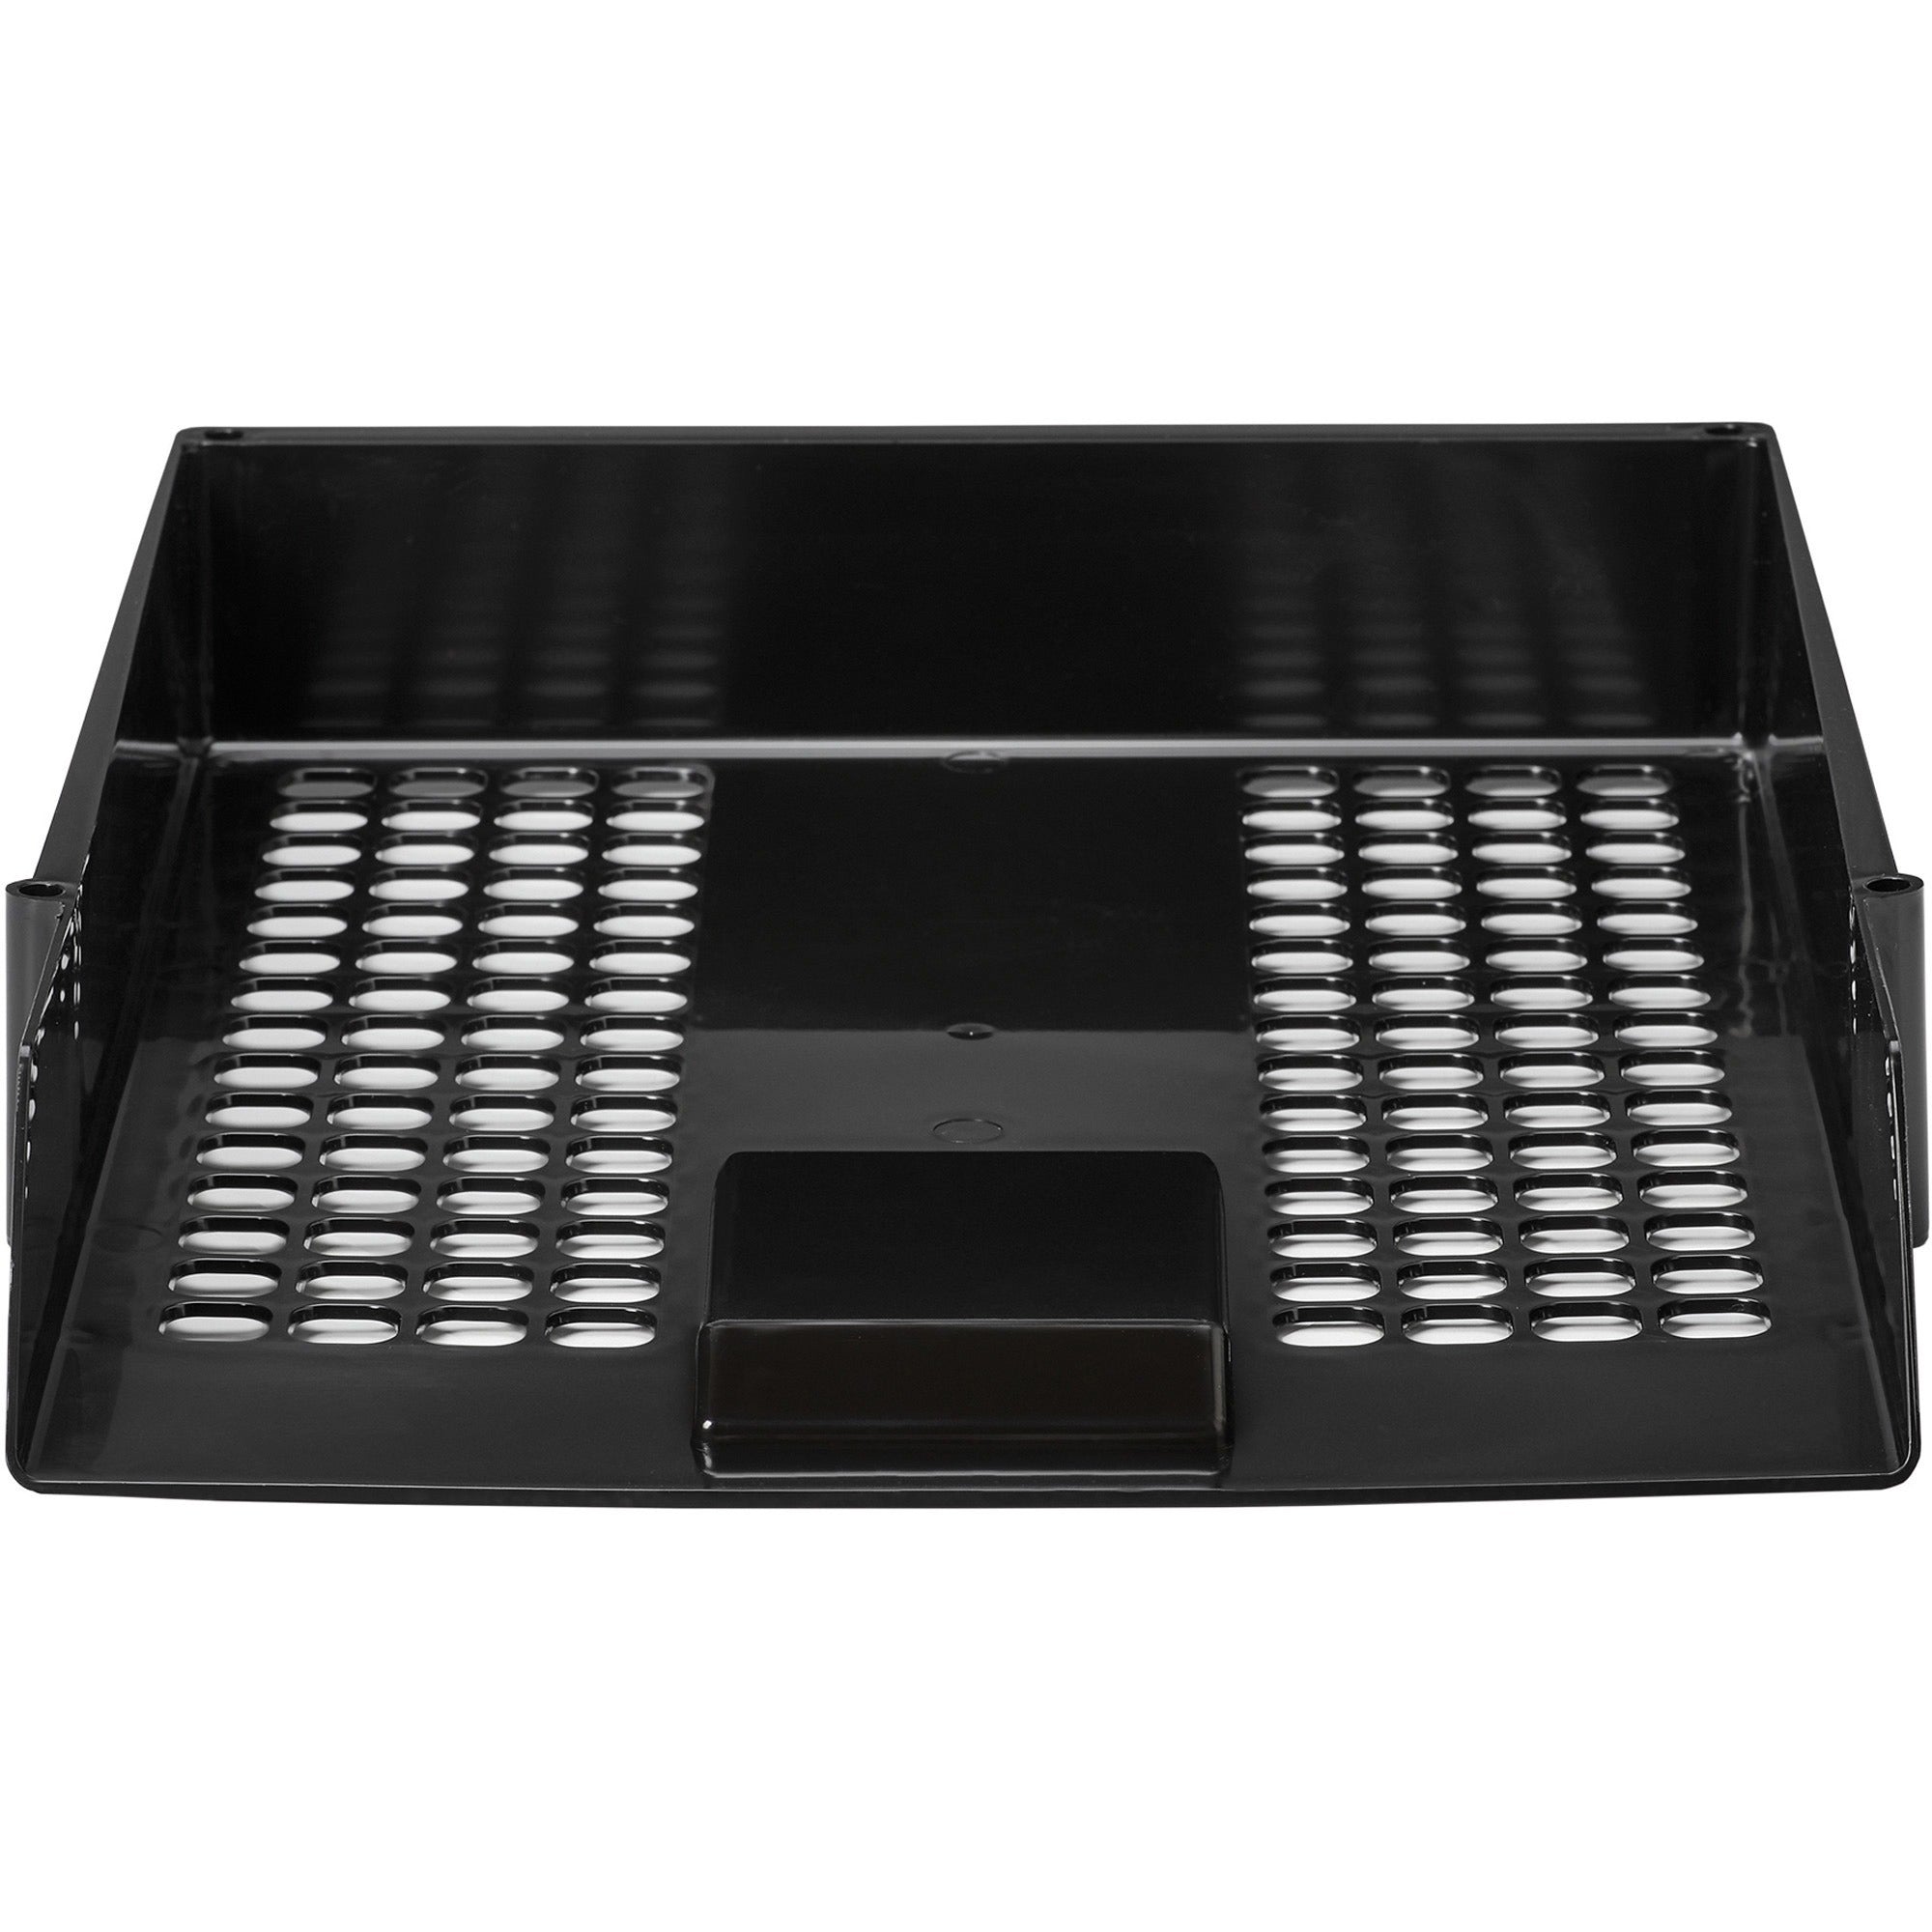 deflecto-antimicrobial-industrial-front-load-tray-24-height-x-108-width-x-138-depthdesktop-antimicrobial-lightweight-mildew-resistant-front-loading-black-polystyrene_def63905 - 2